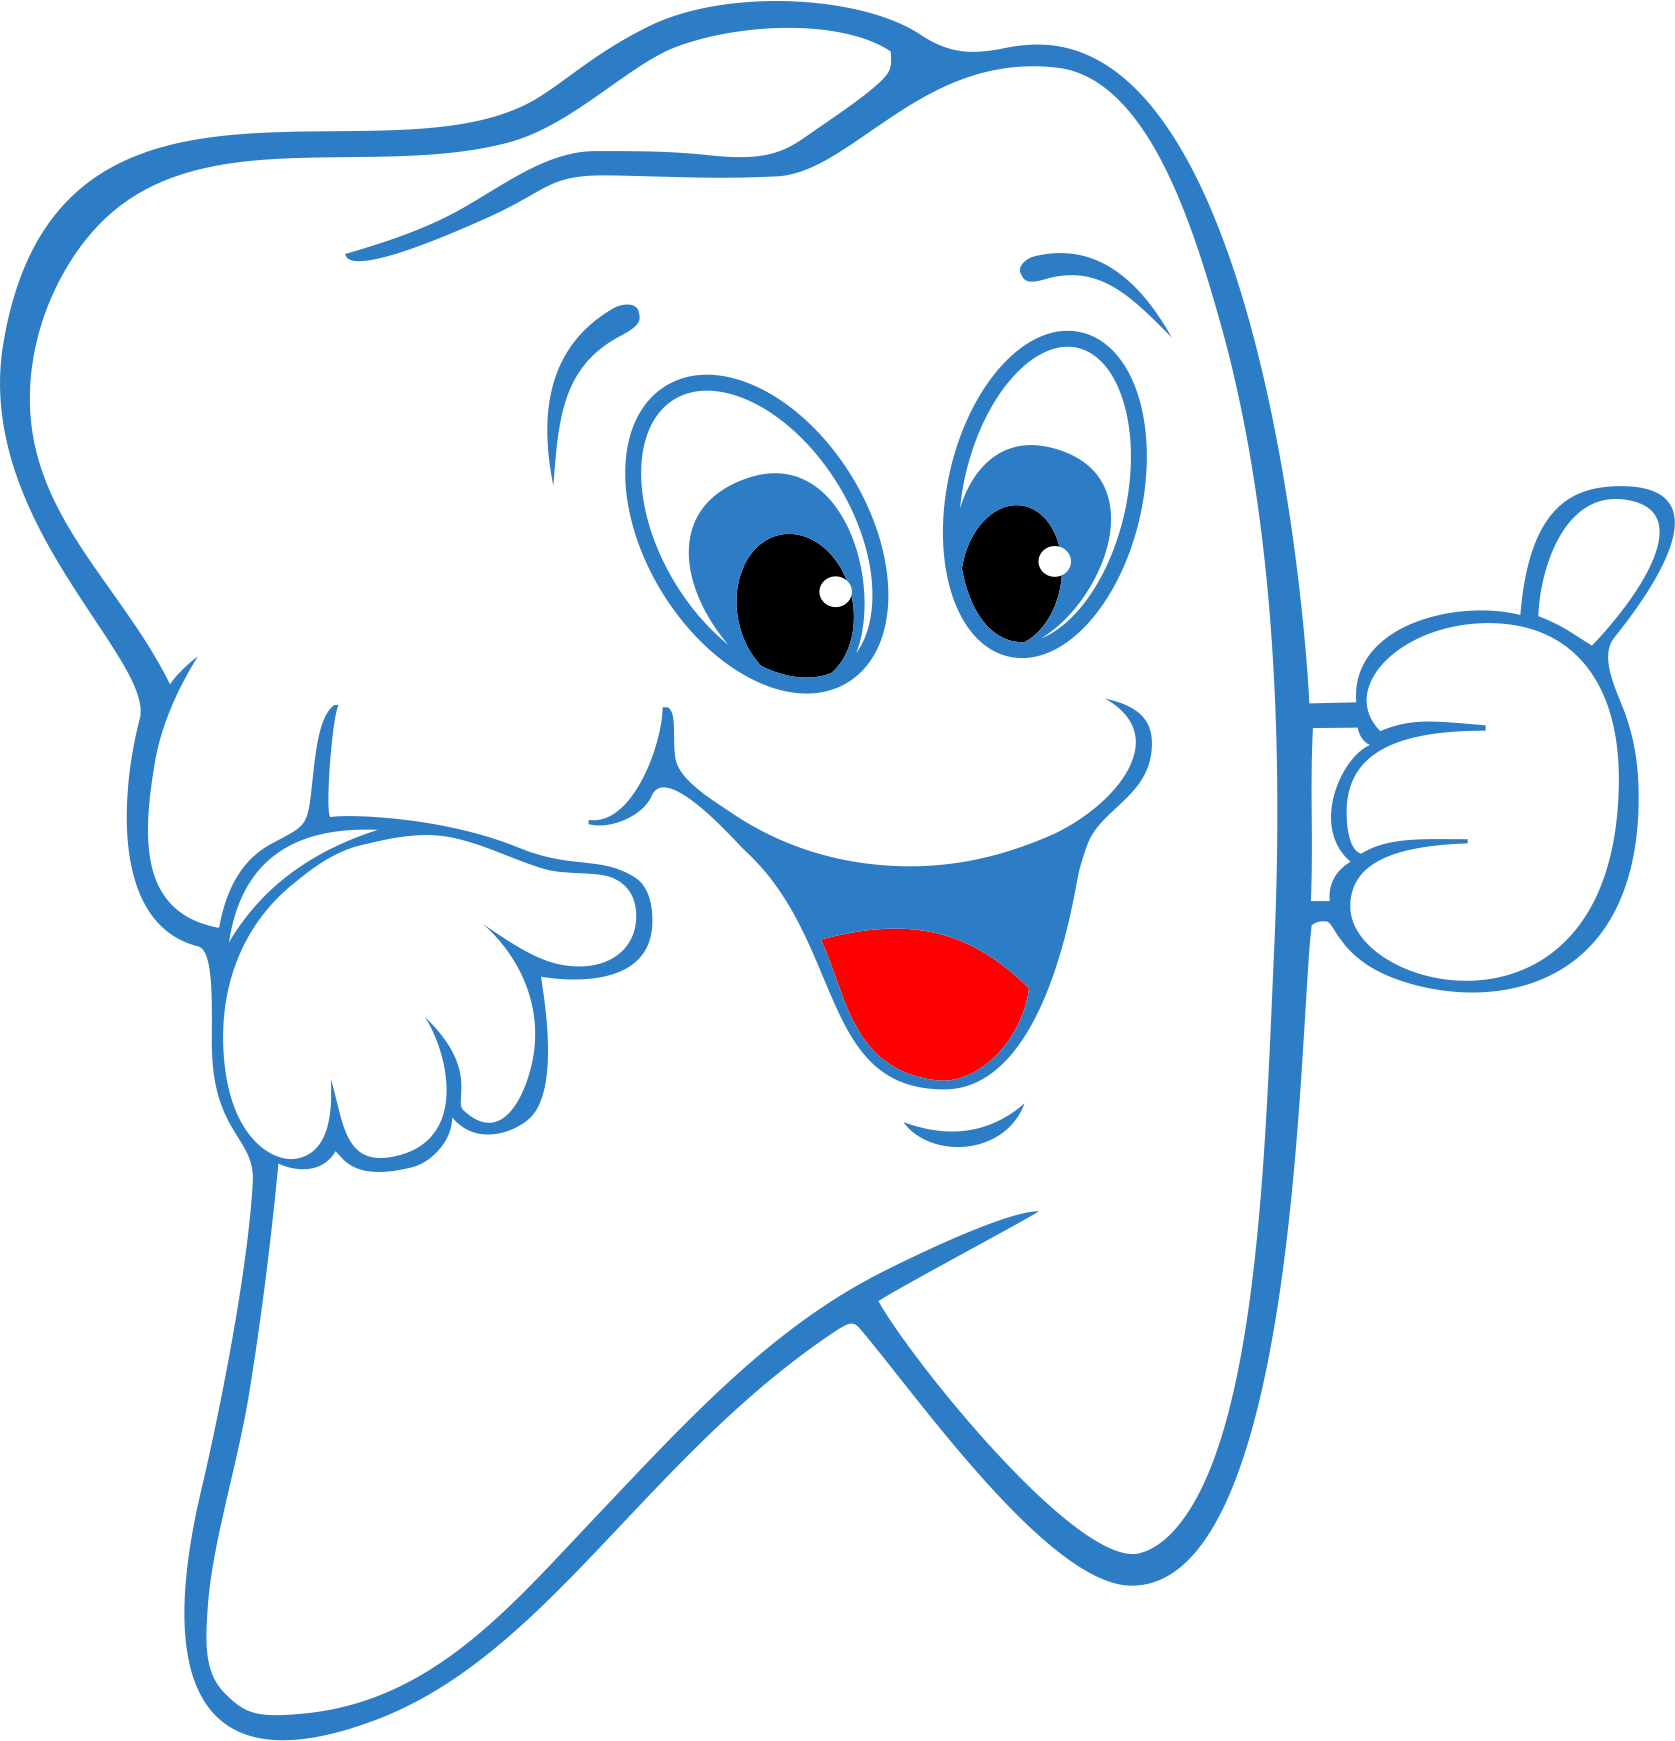 Tooth clip art on tooth fairy clip art and first tooth image #40840